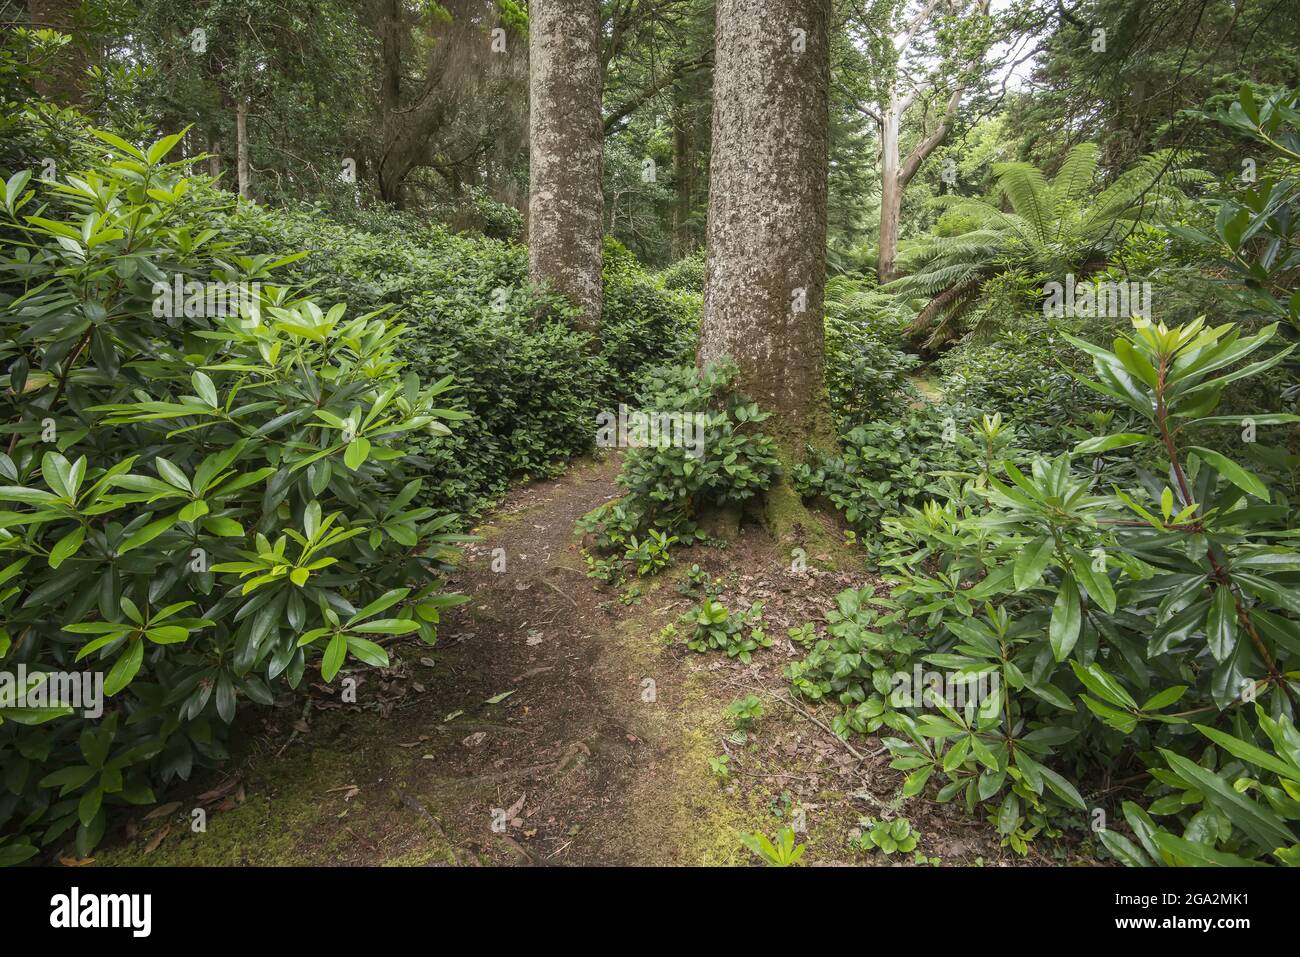 Pathway through rhododendrons, ferns and trees in the lush woodlands of the 19th Century Derreen Gardens (Gairdin Derreen) Stock Photo